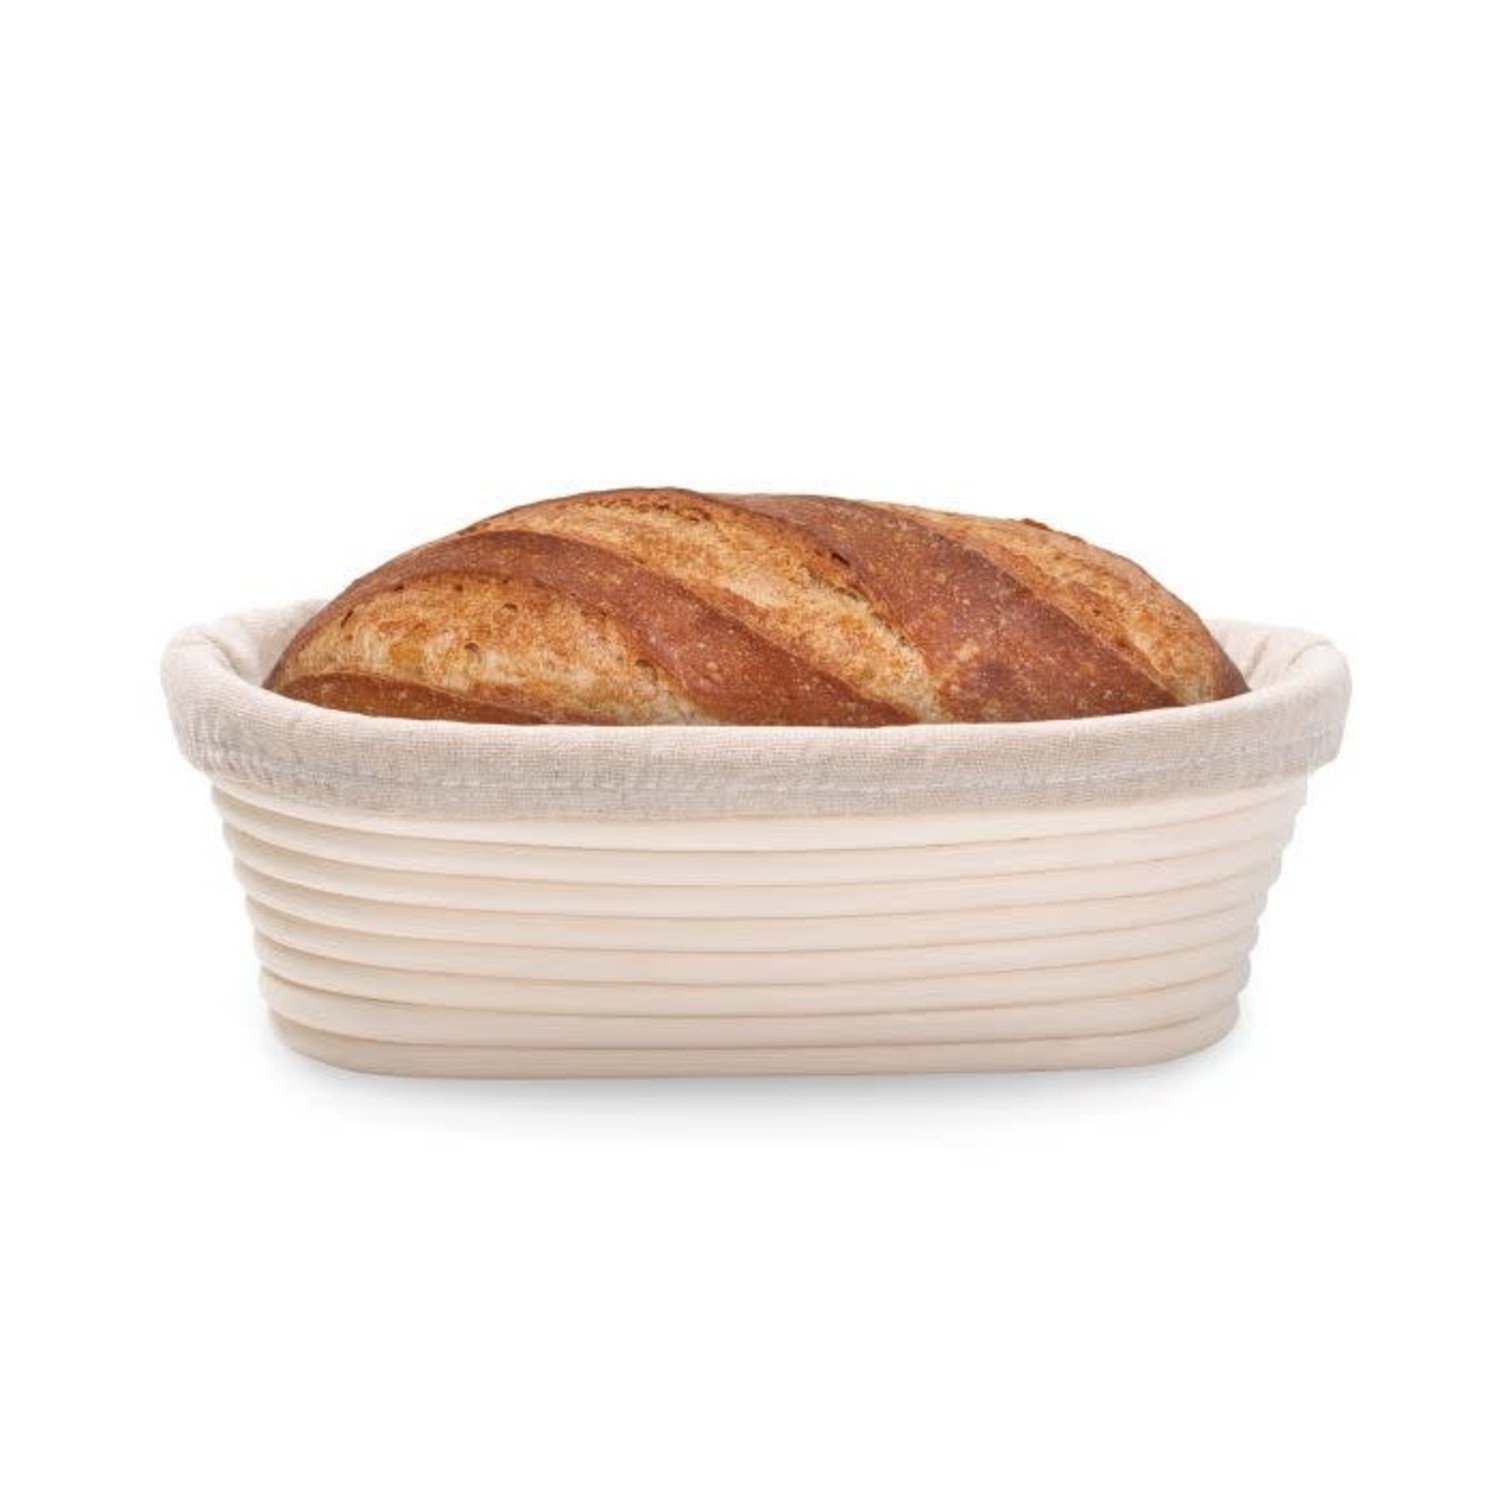 Oval Mini Loaf Pan Oval-Shaped Small Bread Pans For Homemade Bread